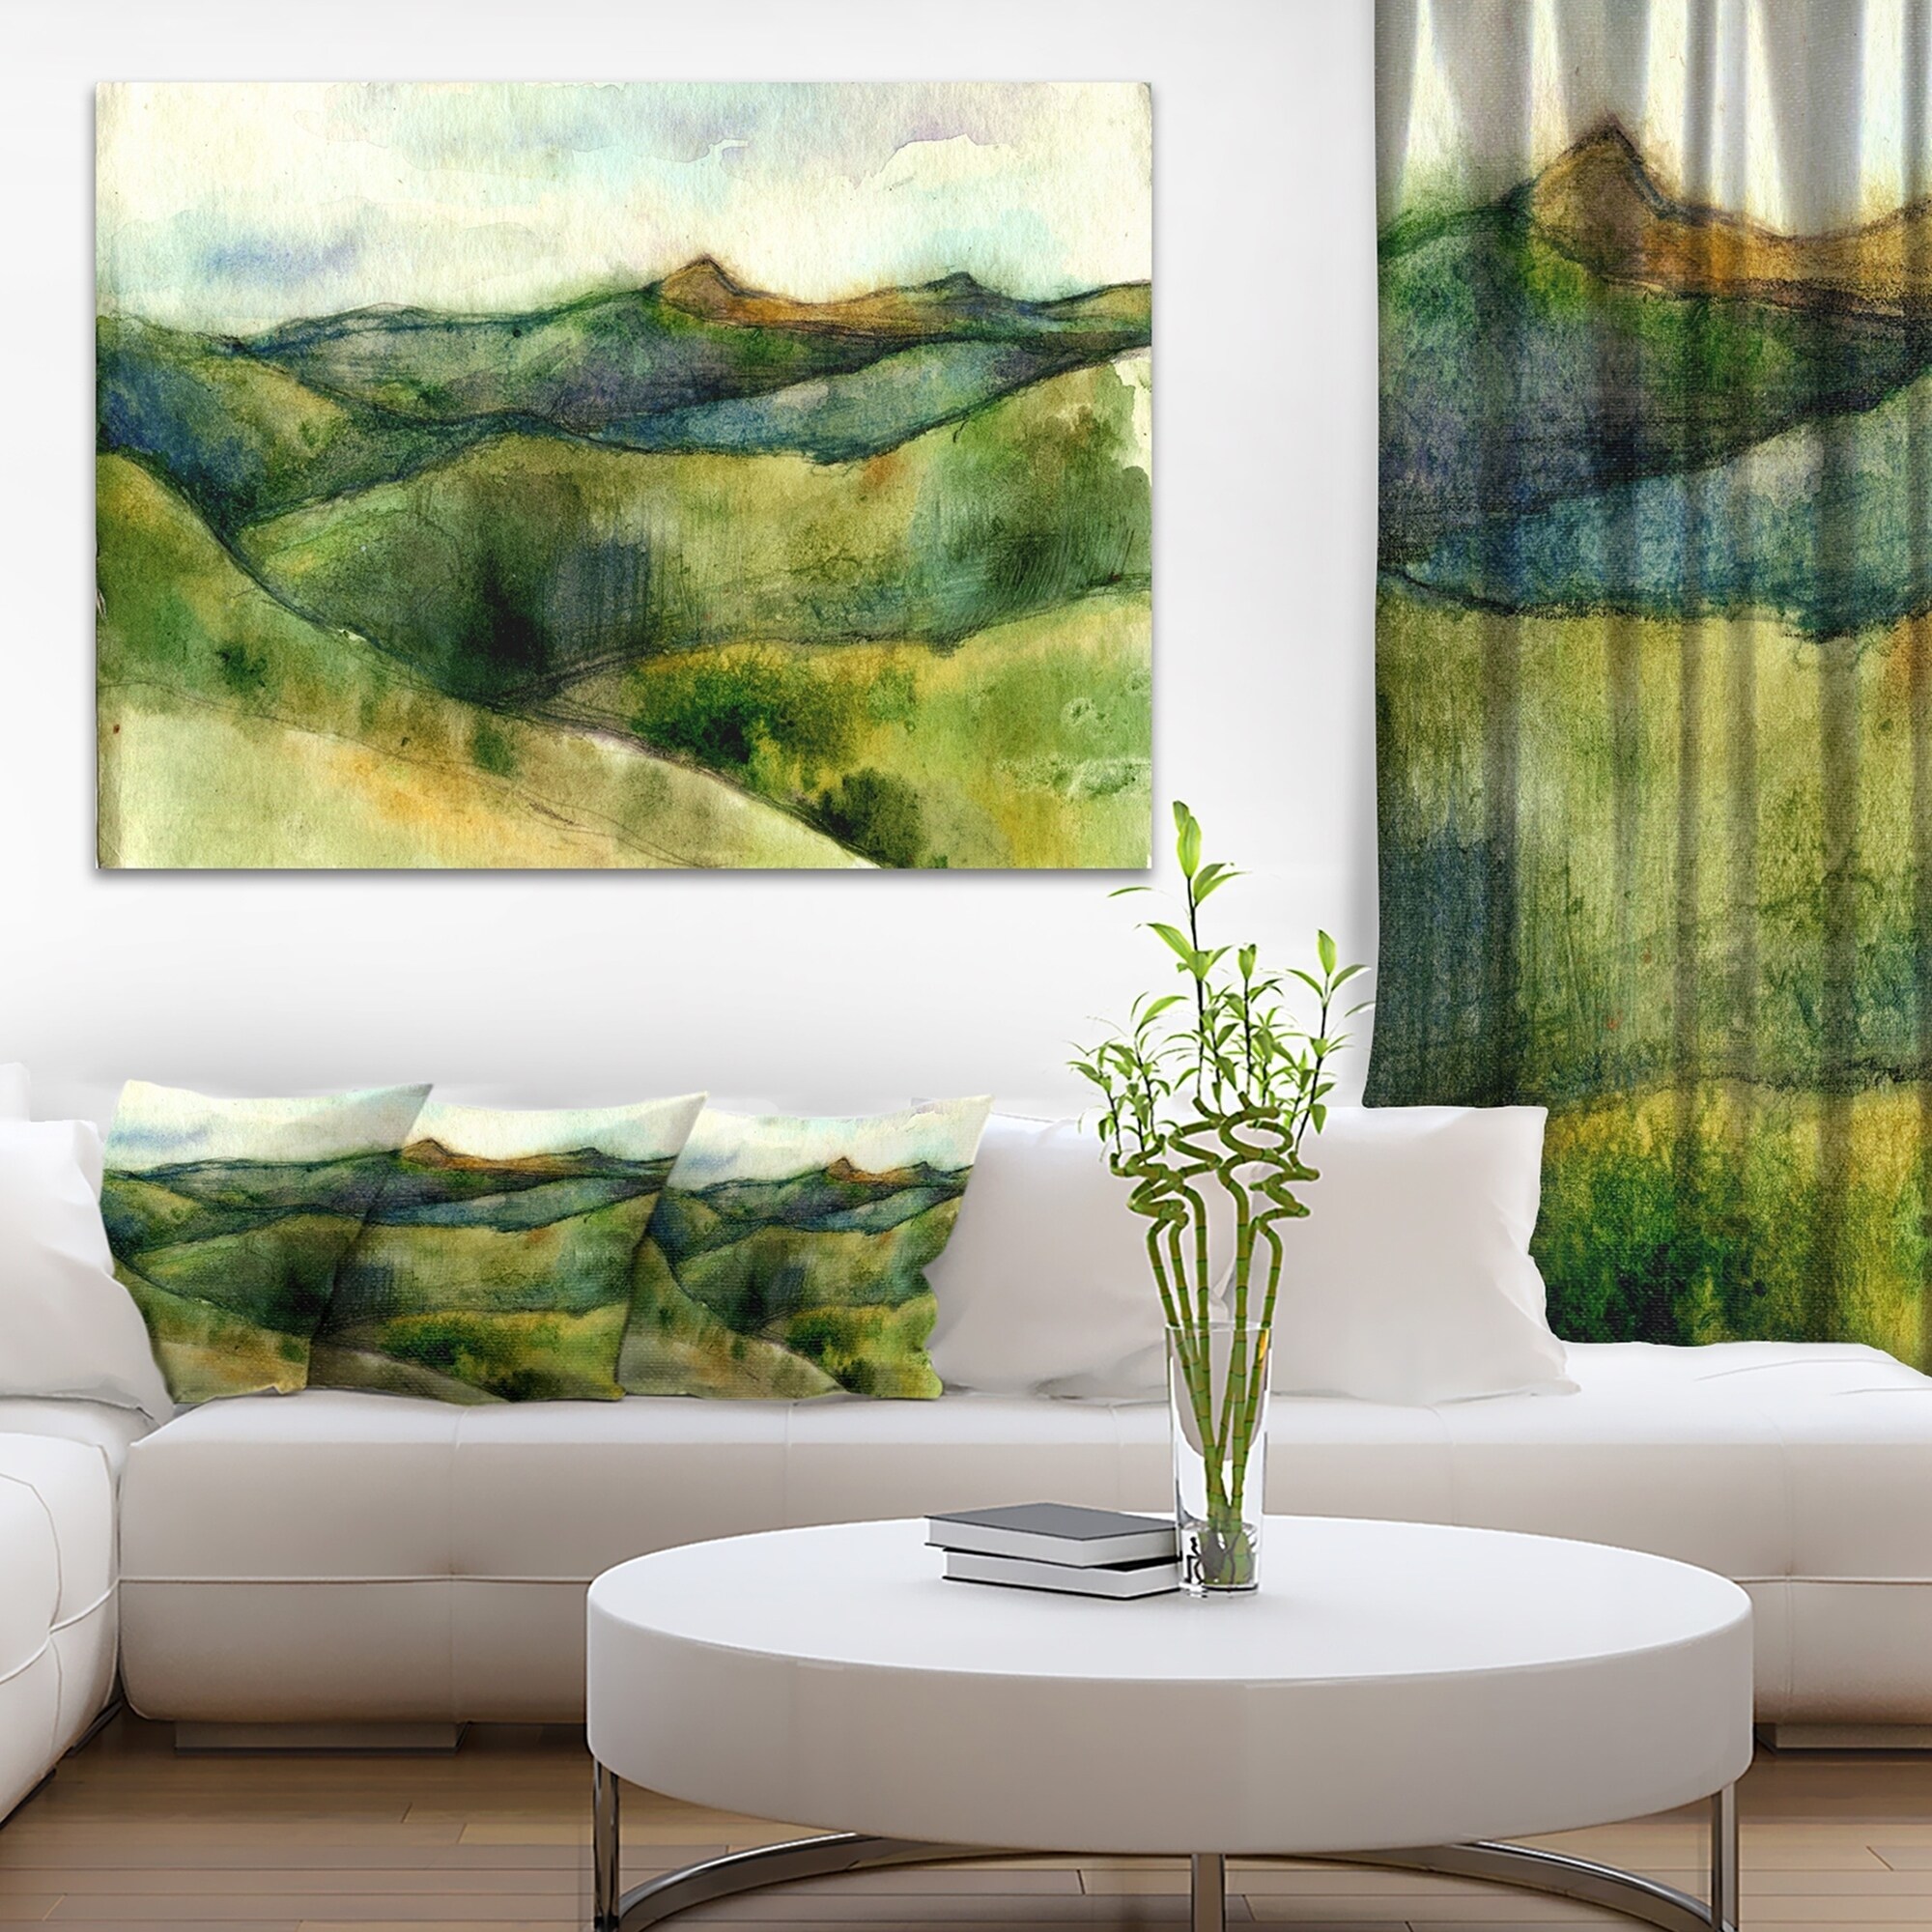 x 32 in 39 in Created On Lightweight Polyester Fabric Designart TAP11069-39-32  Green Small Lake Panoramic View Landscape Blanket Décor Art for Home and Office Wall Tapestry Medium 